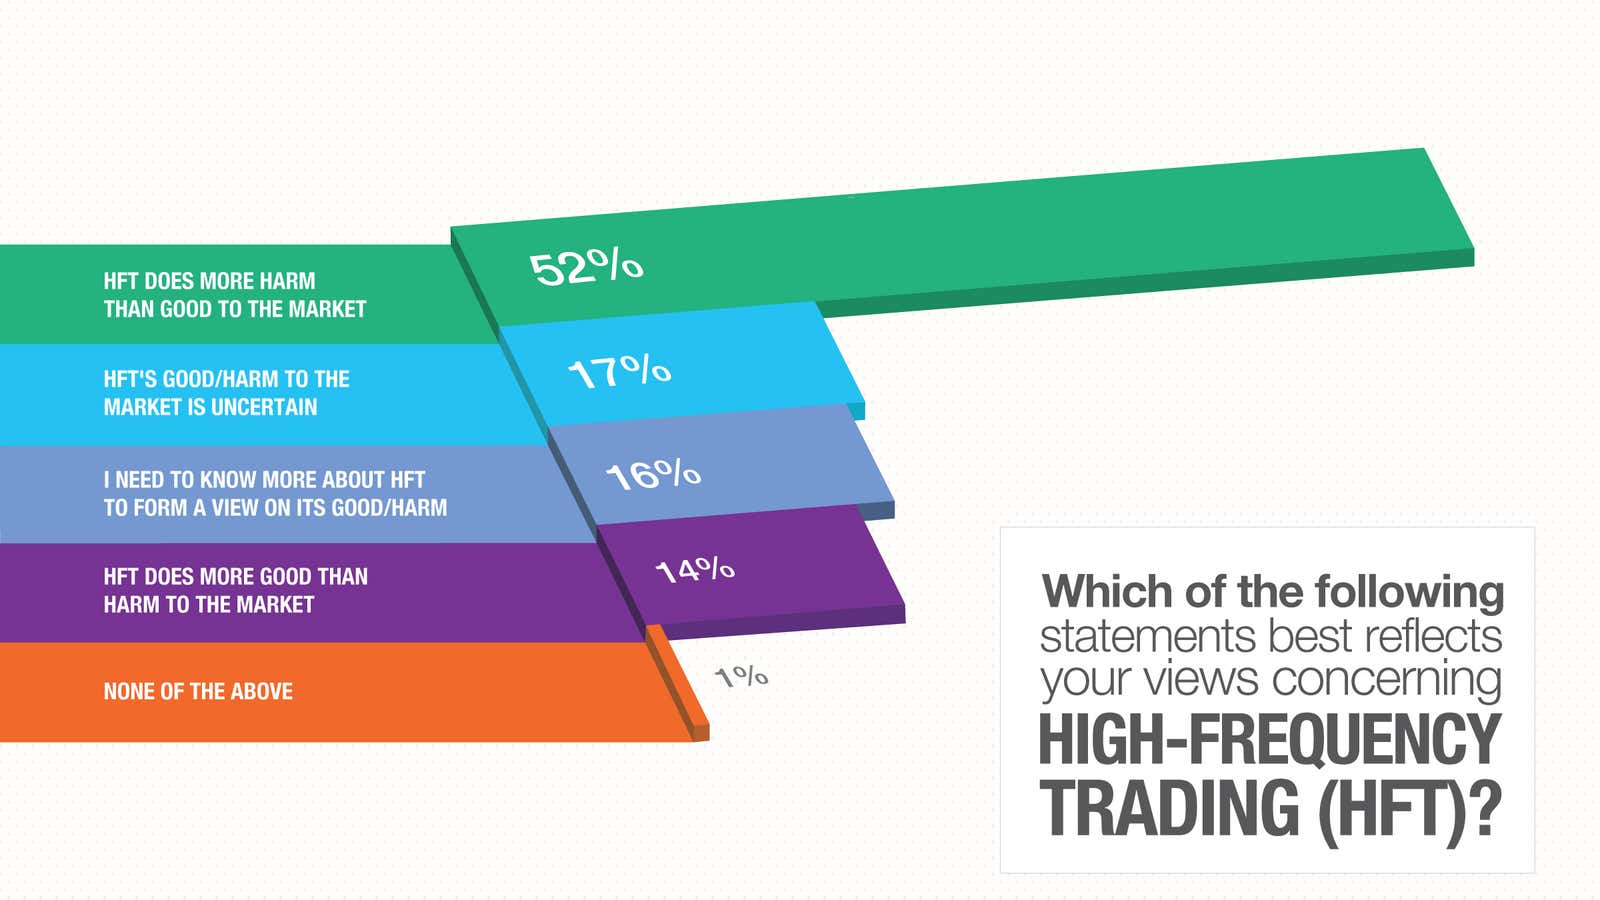 Does high-frequency trading do more harm than good?